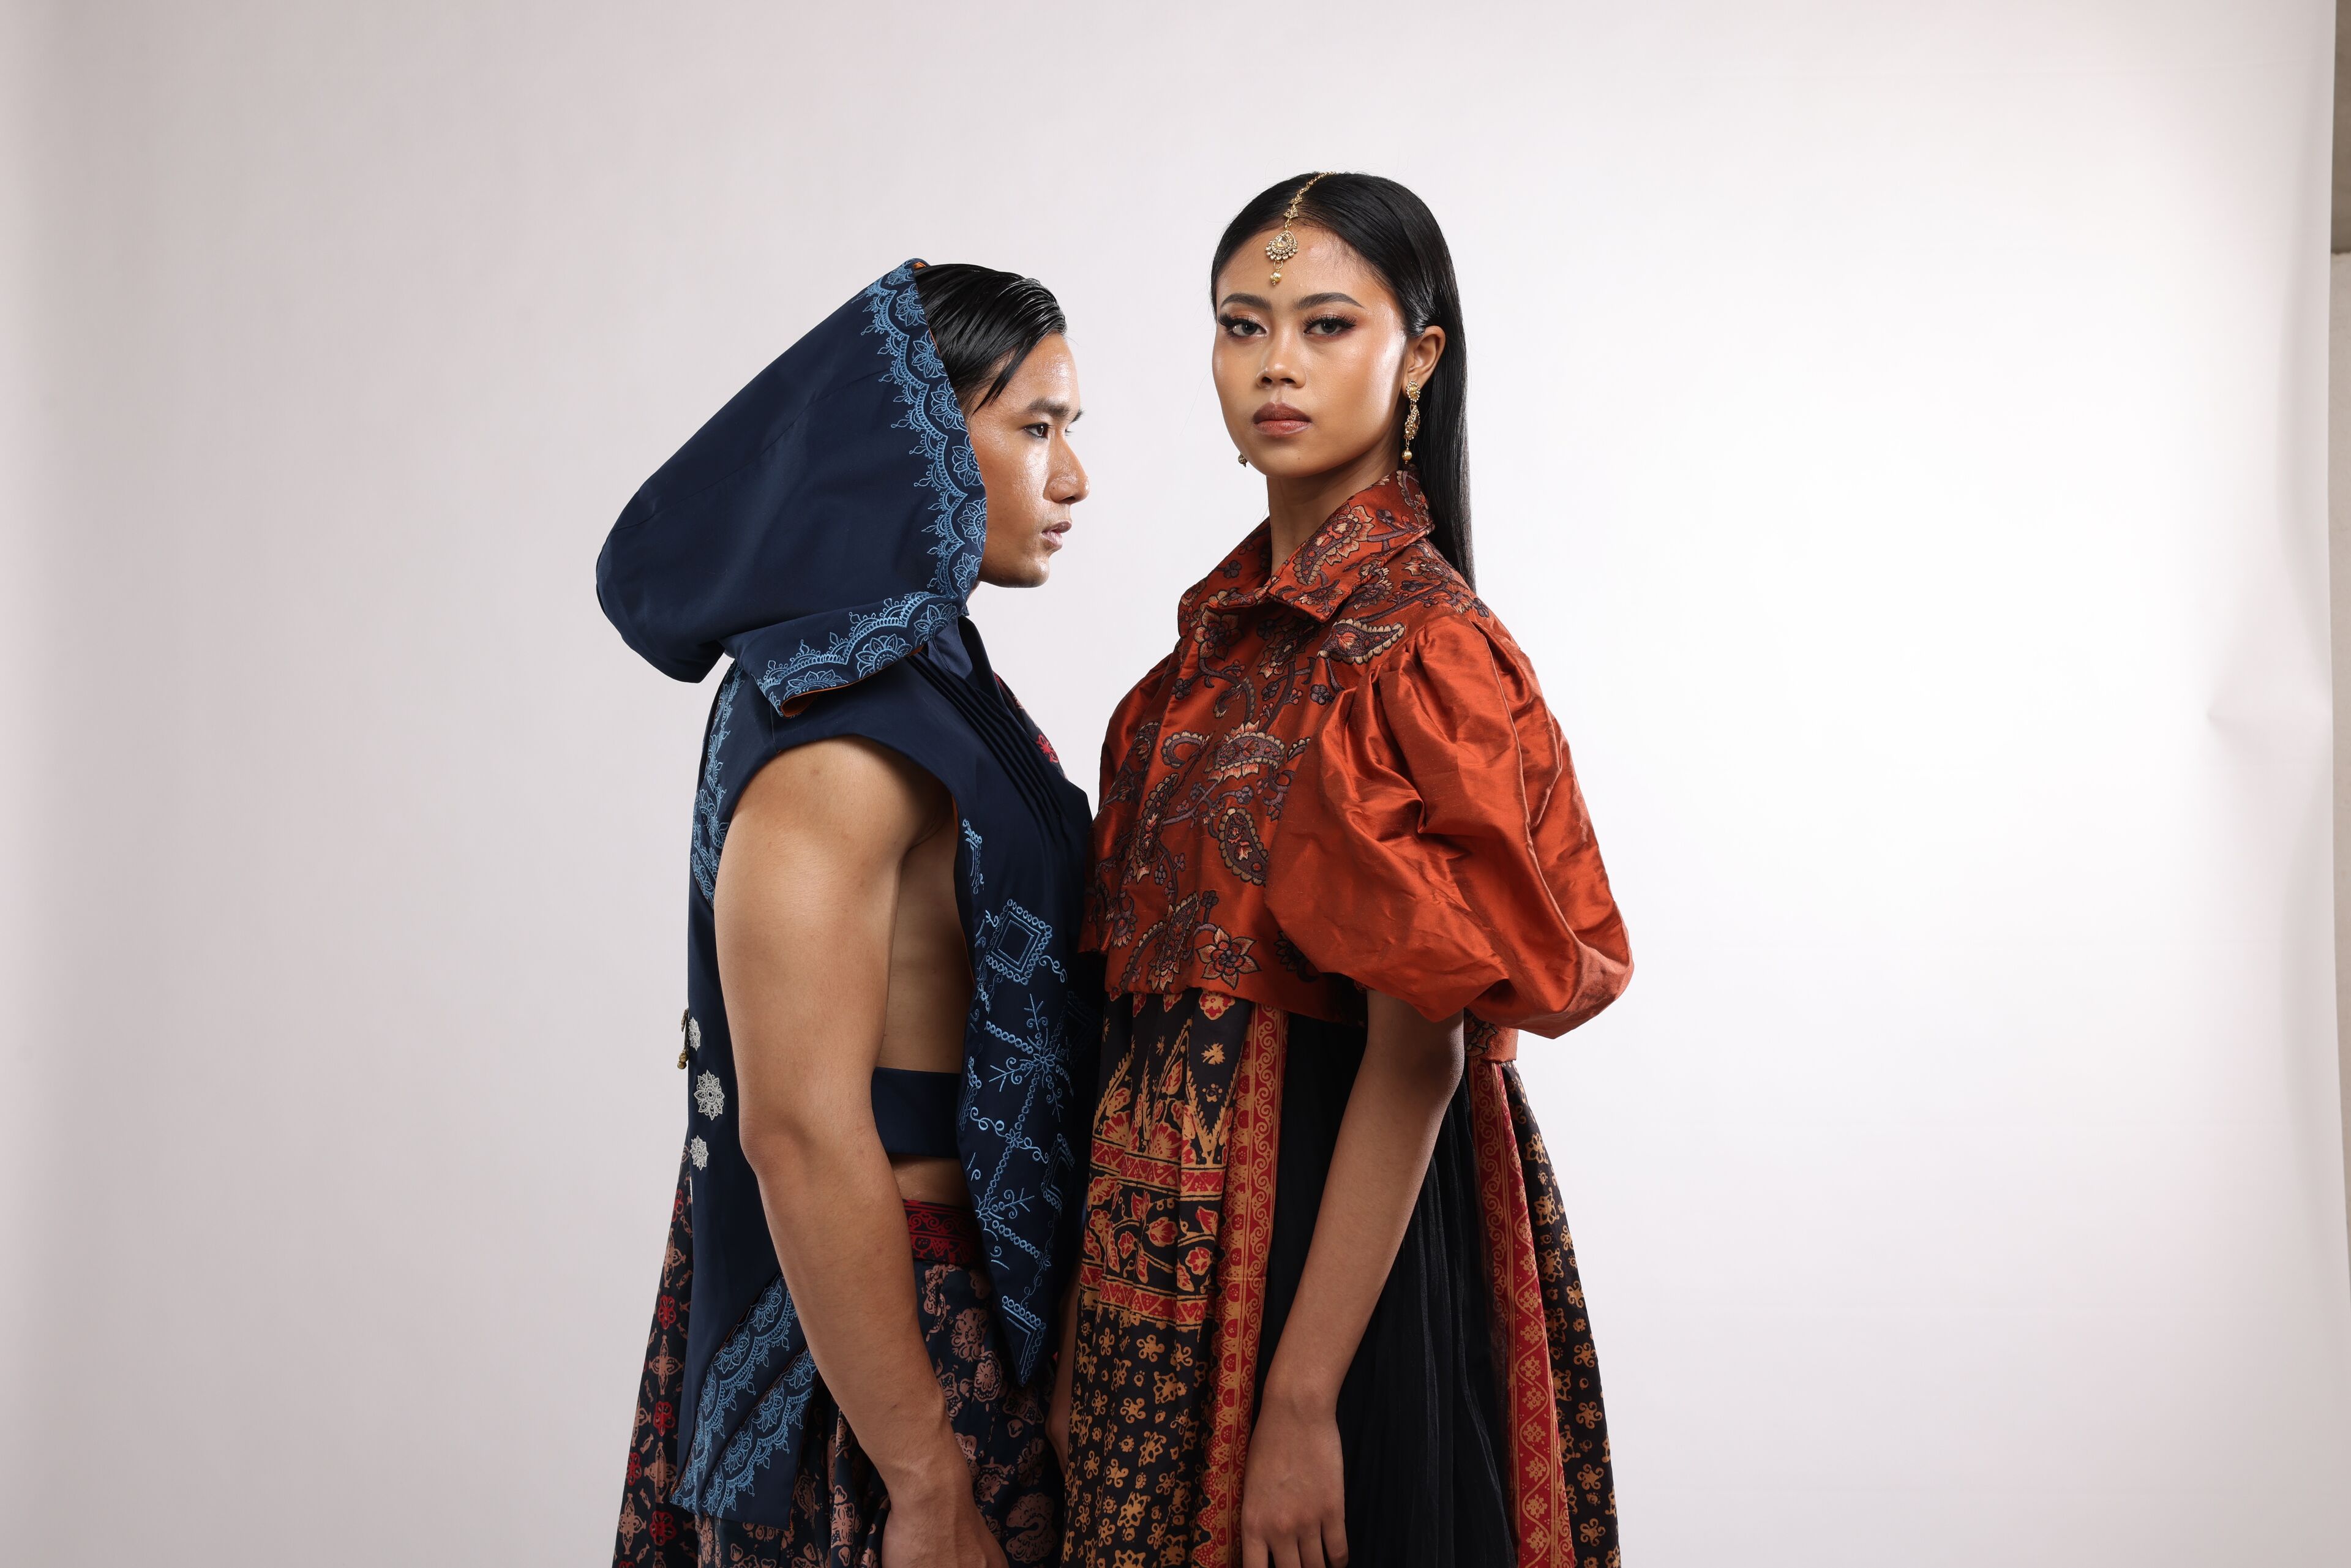 Two models showcase a blend of traditional and modern attire, with one in a blue embroidered hood and the other in an ornate, rust-colored blouse, both exuding cultural richness.